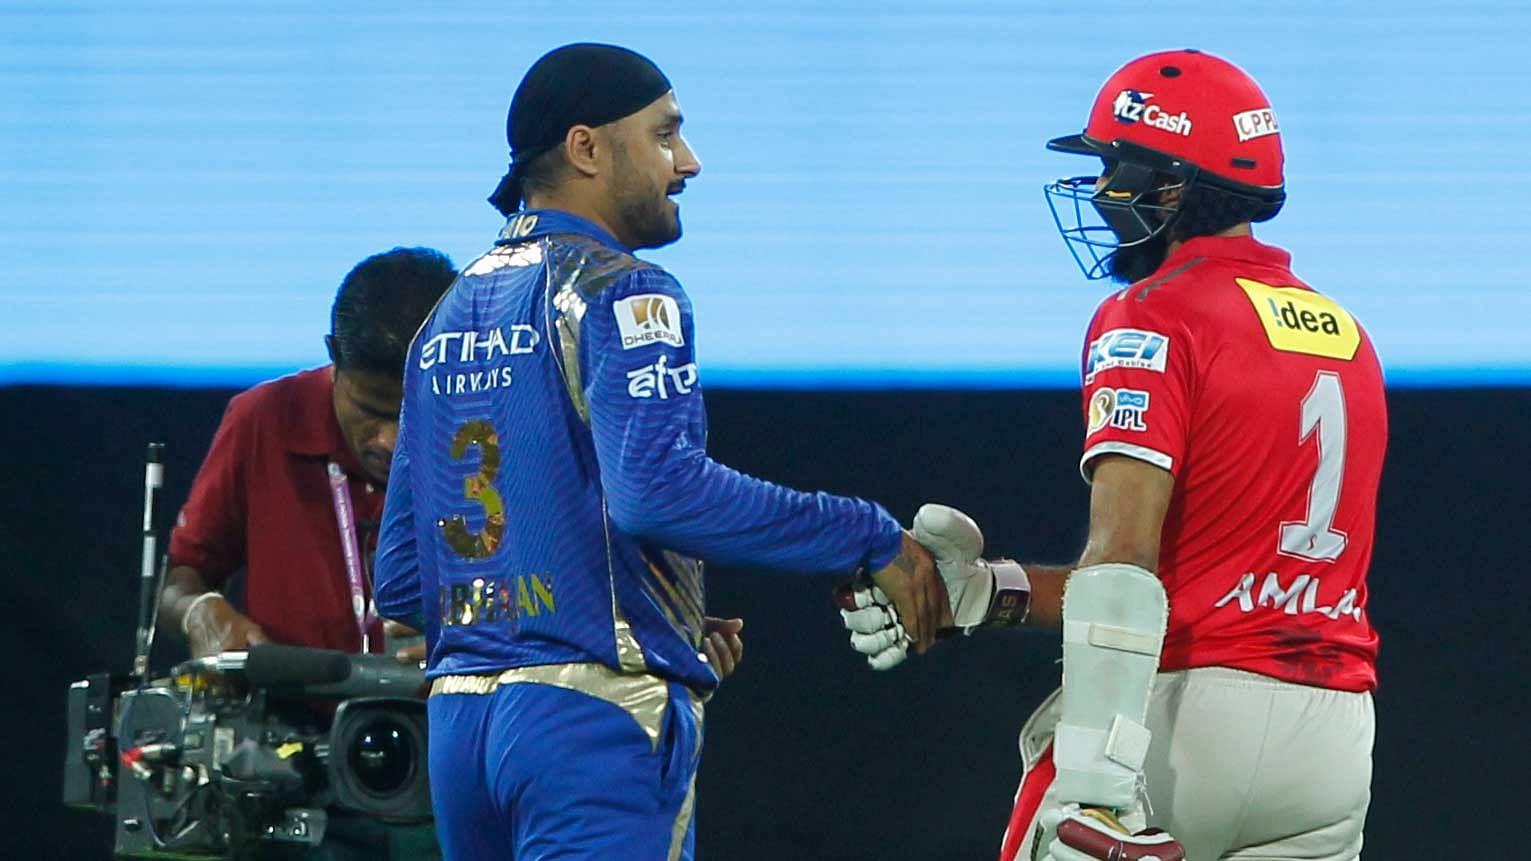 Harbhajan Singh congratulated Amla on his innings after KXIP’s 20 overs. (Photo: BCCI)